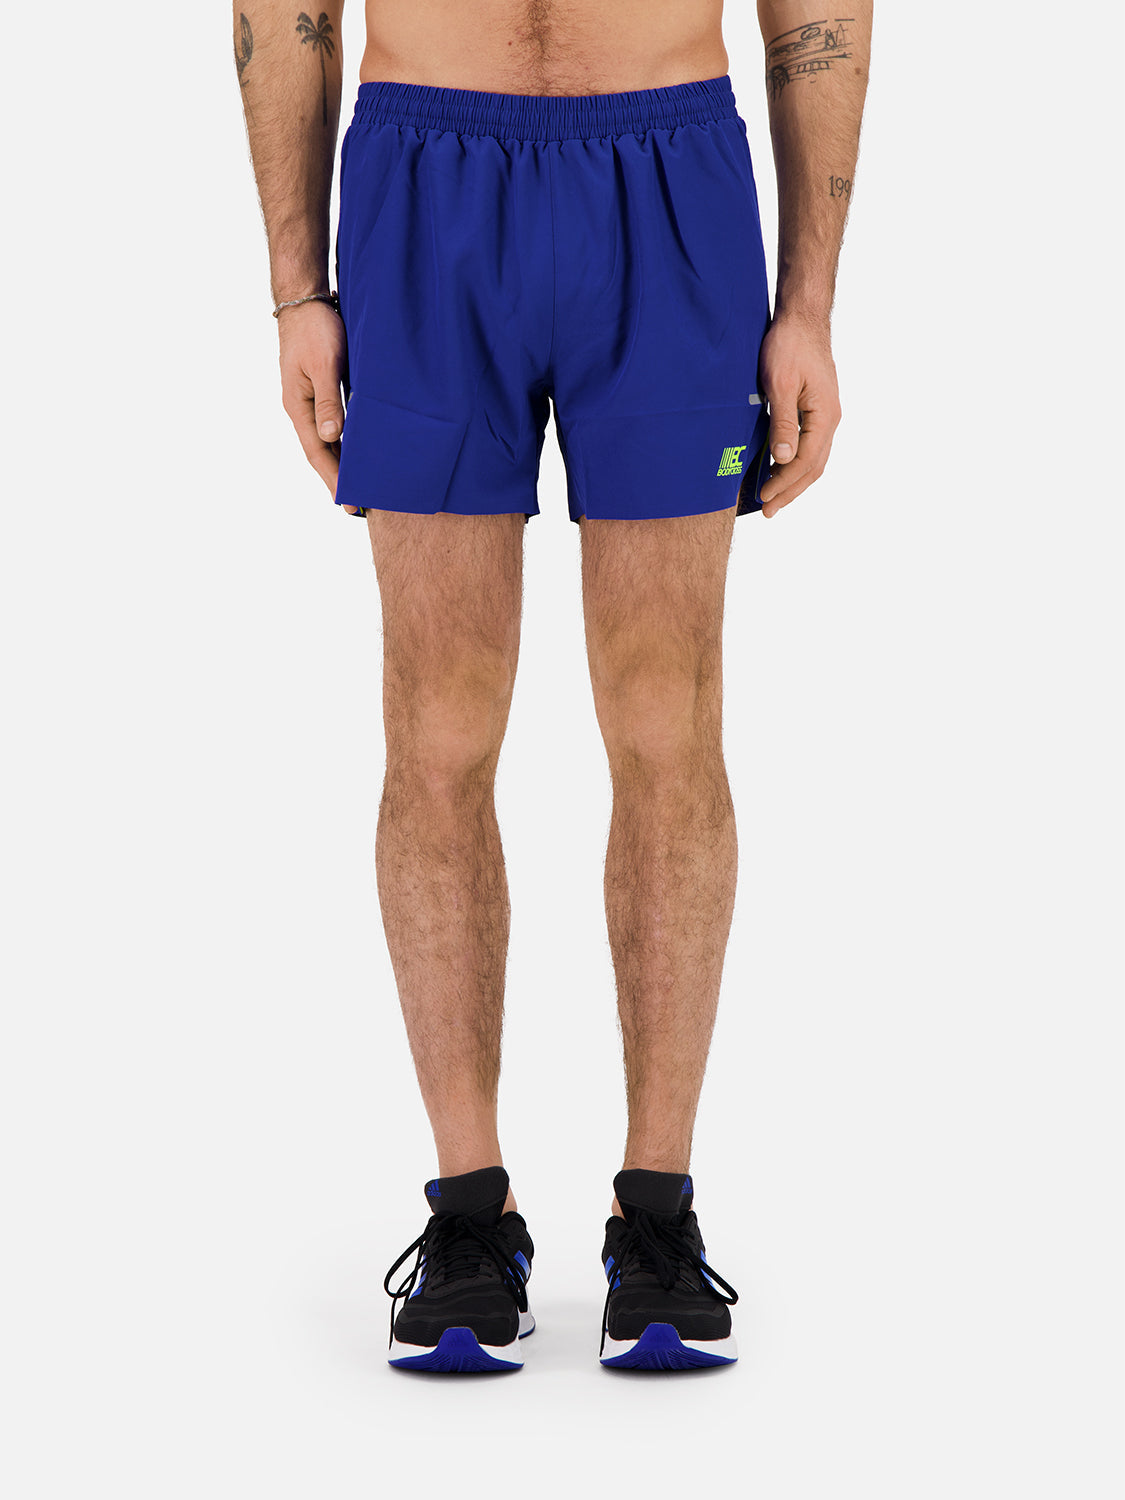 Oury Laufshorts